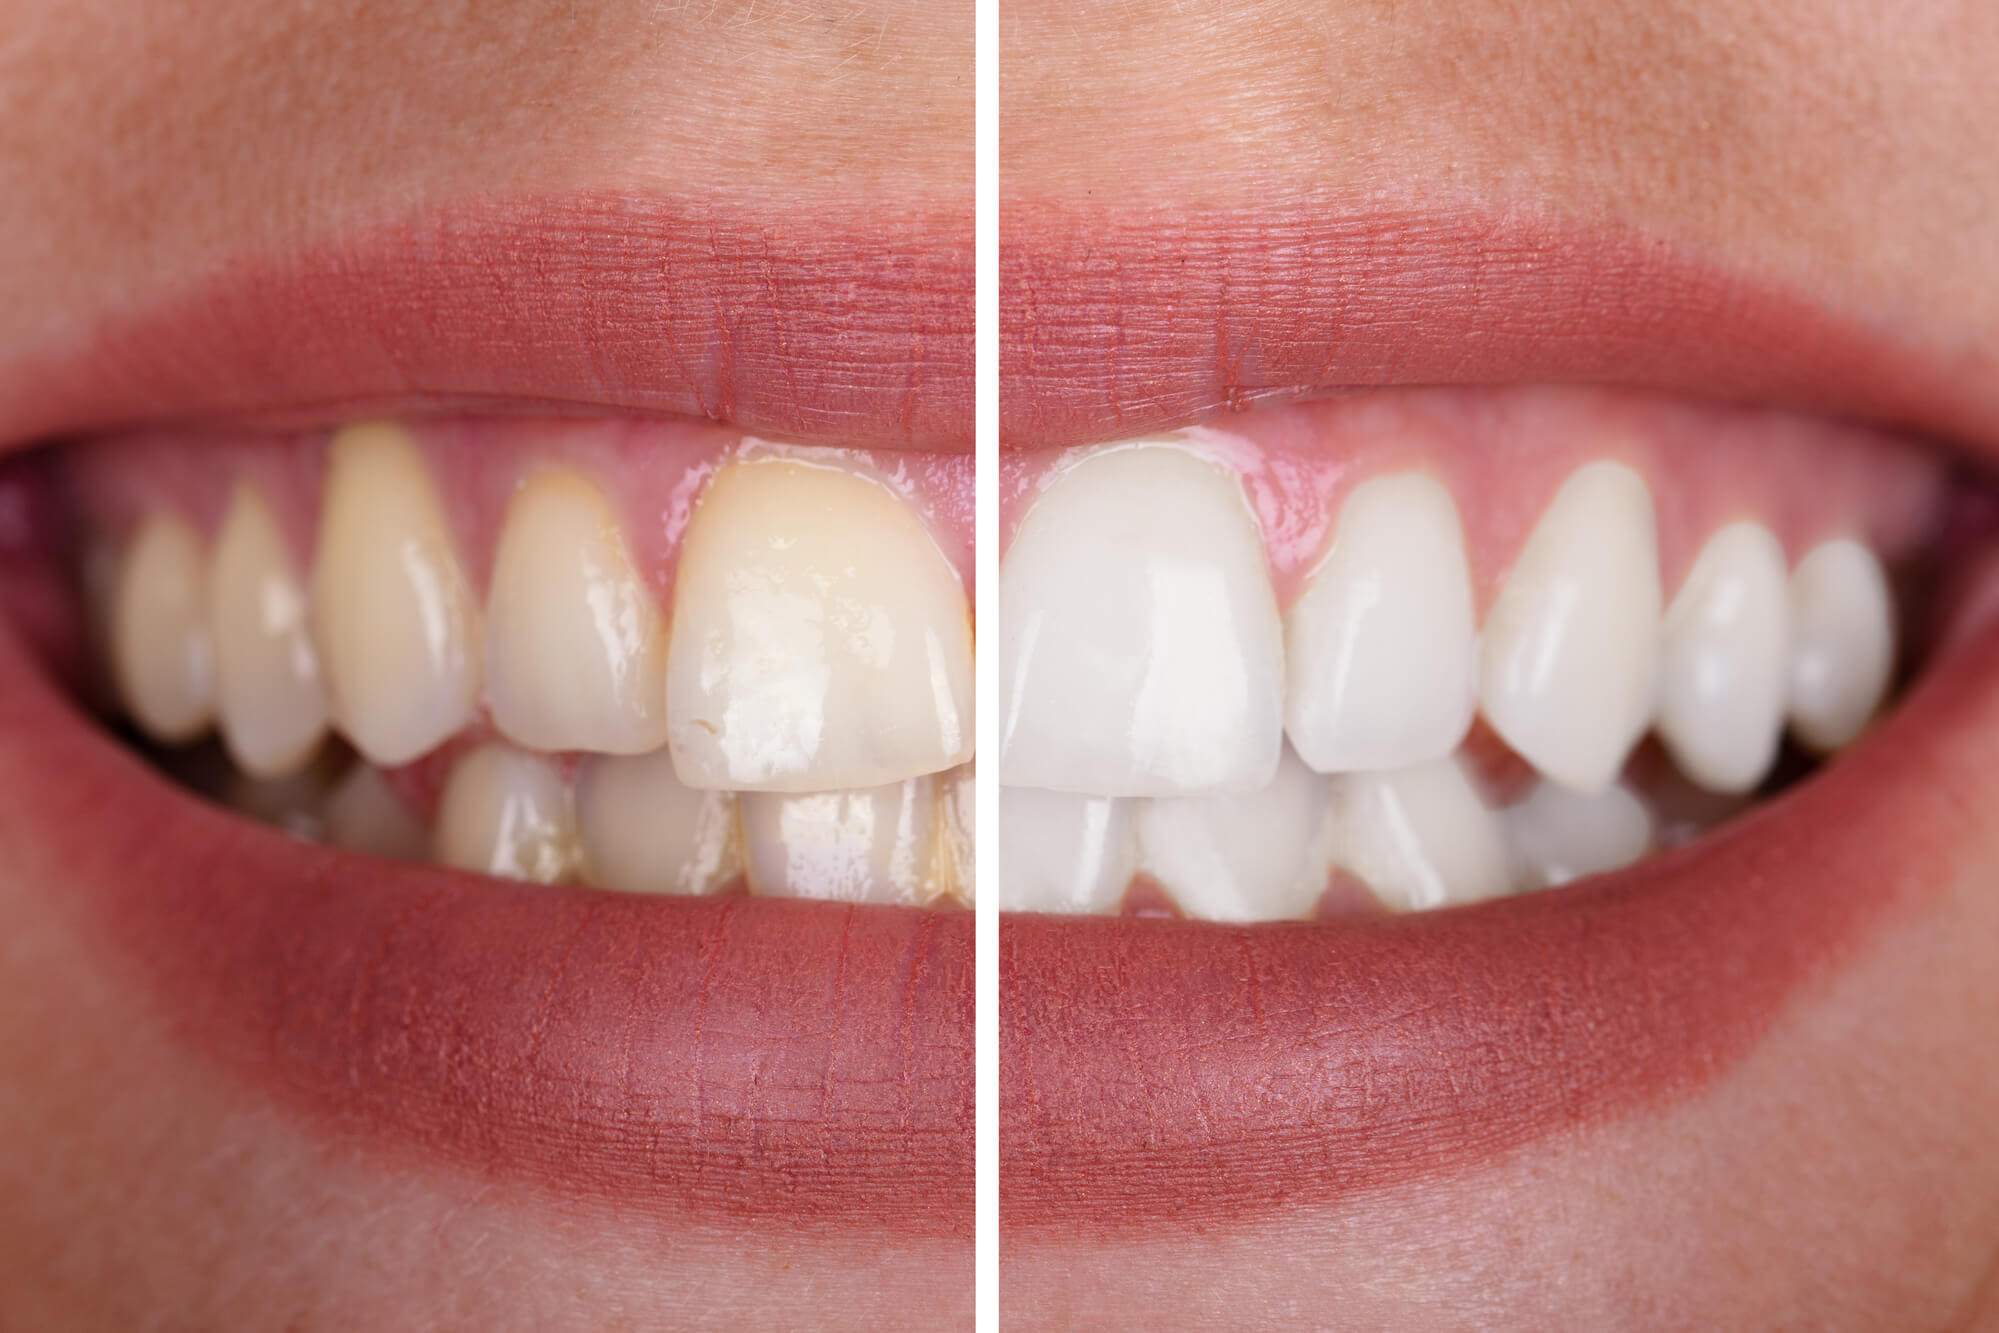 cosmetic dentist in Raleigh shows how teeth whitening works on a close up image smile